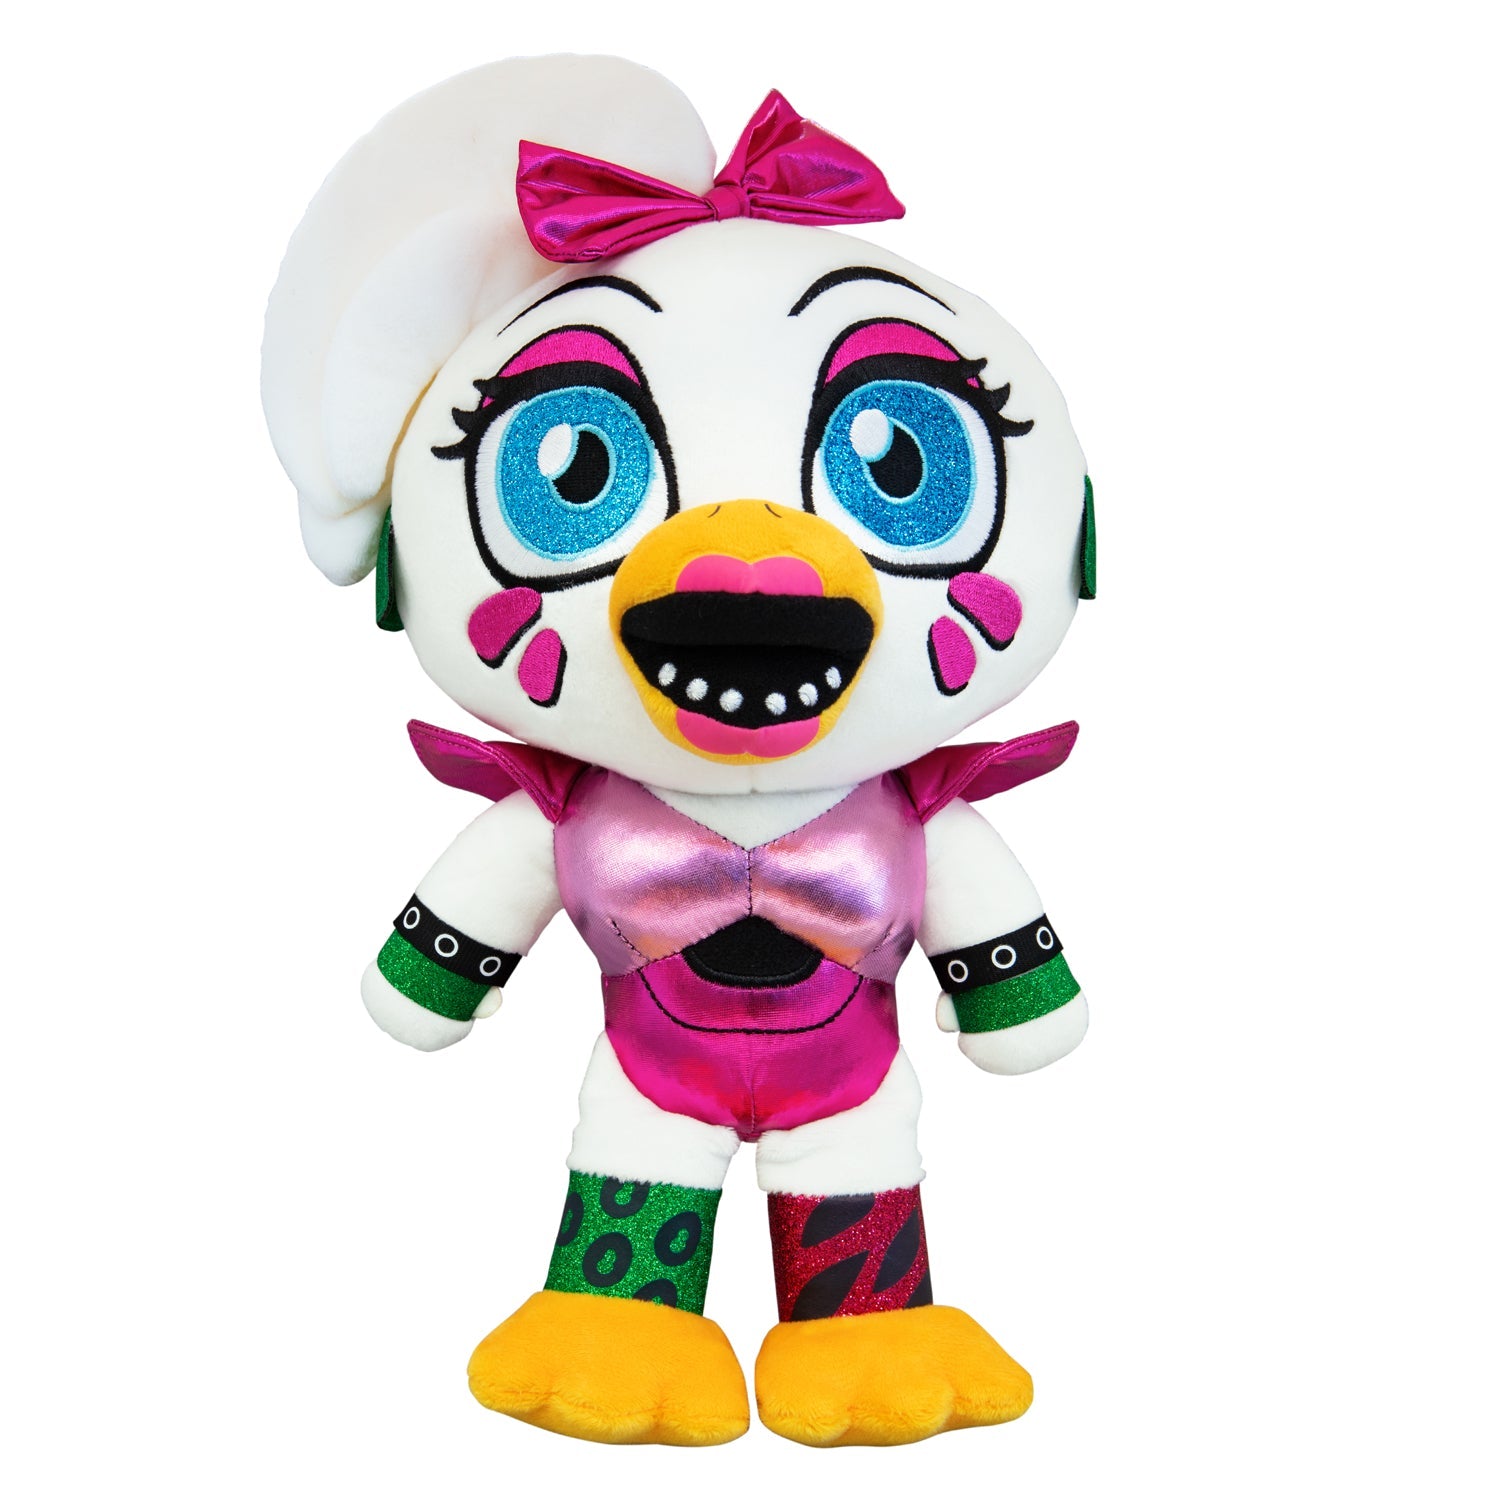 Five Nights at Freddy's - Glamrock Chica Collector's Plush